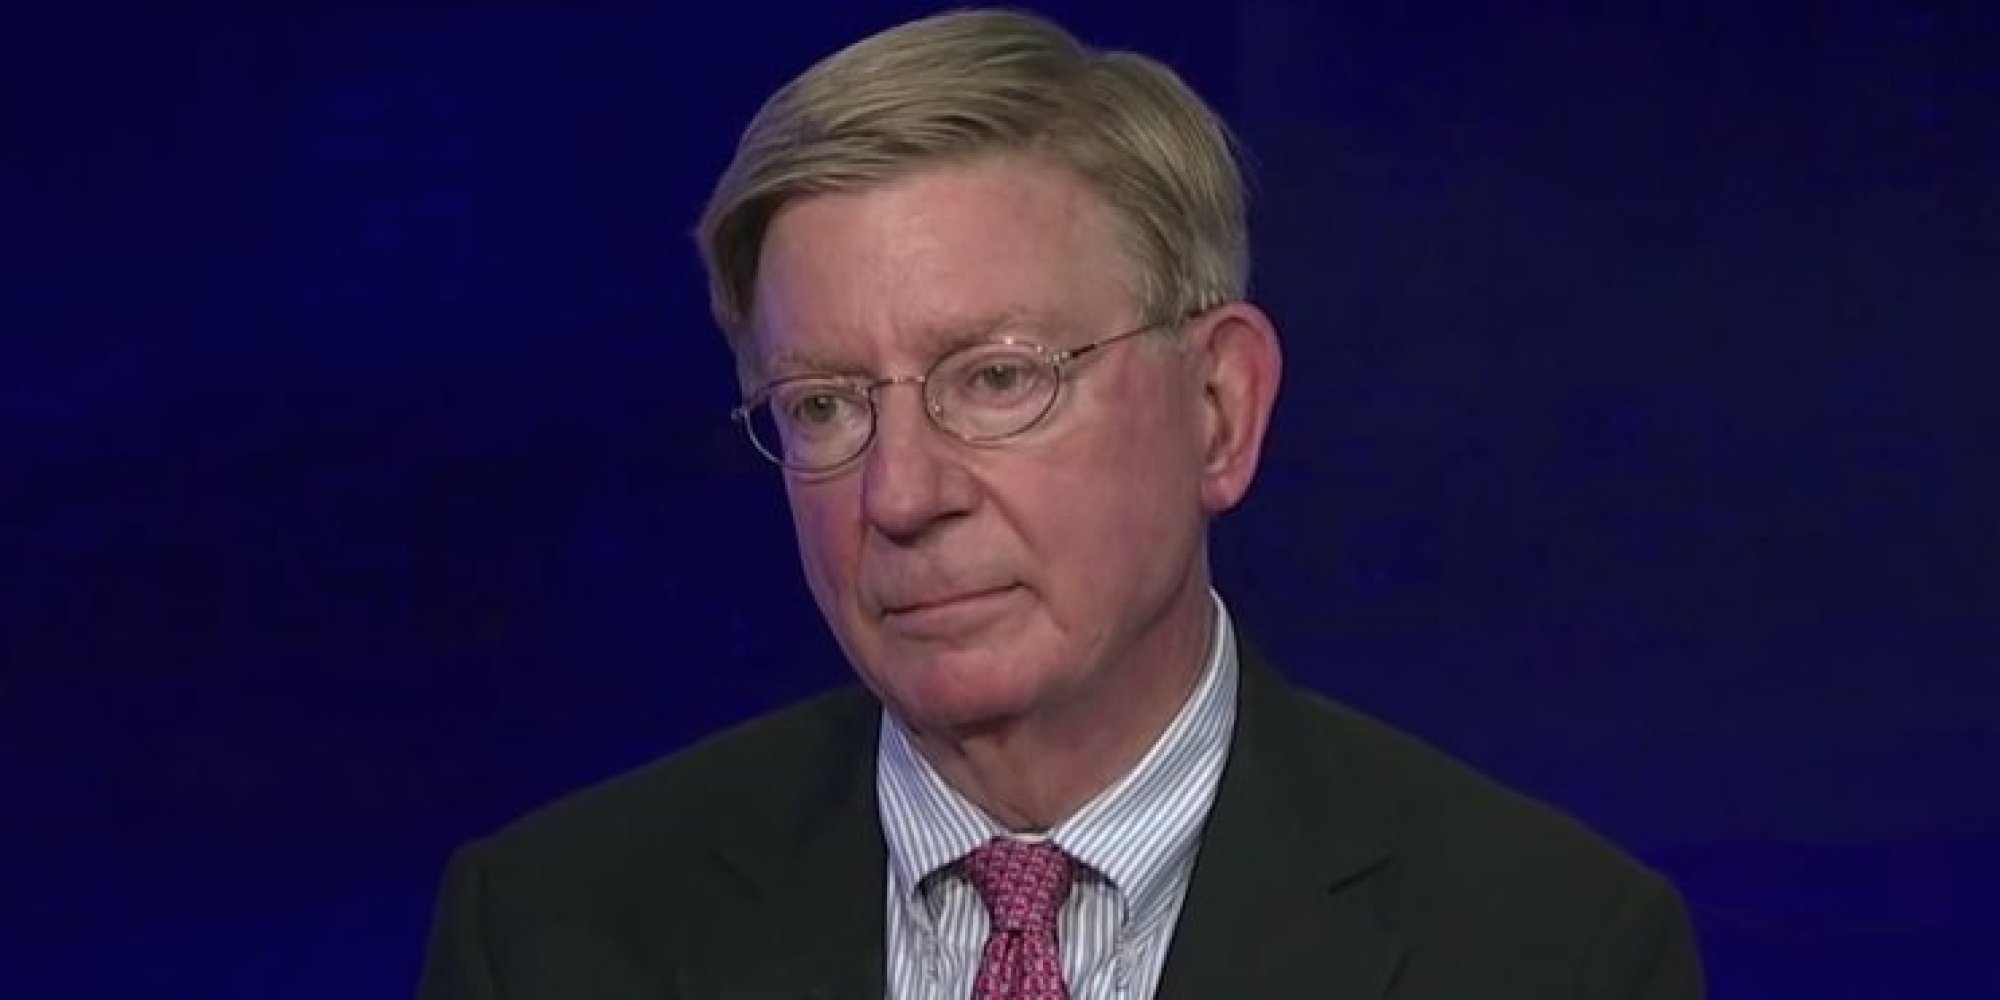 George Will – Trump’s Speech “The Most Dreadful Inaugural Address In History”